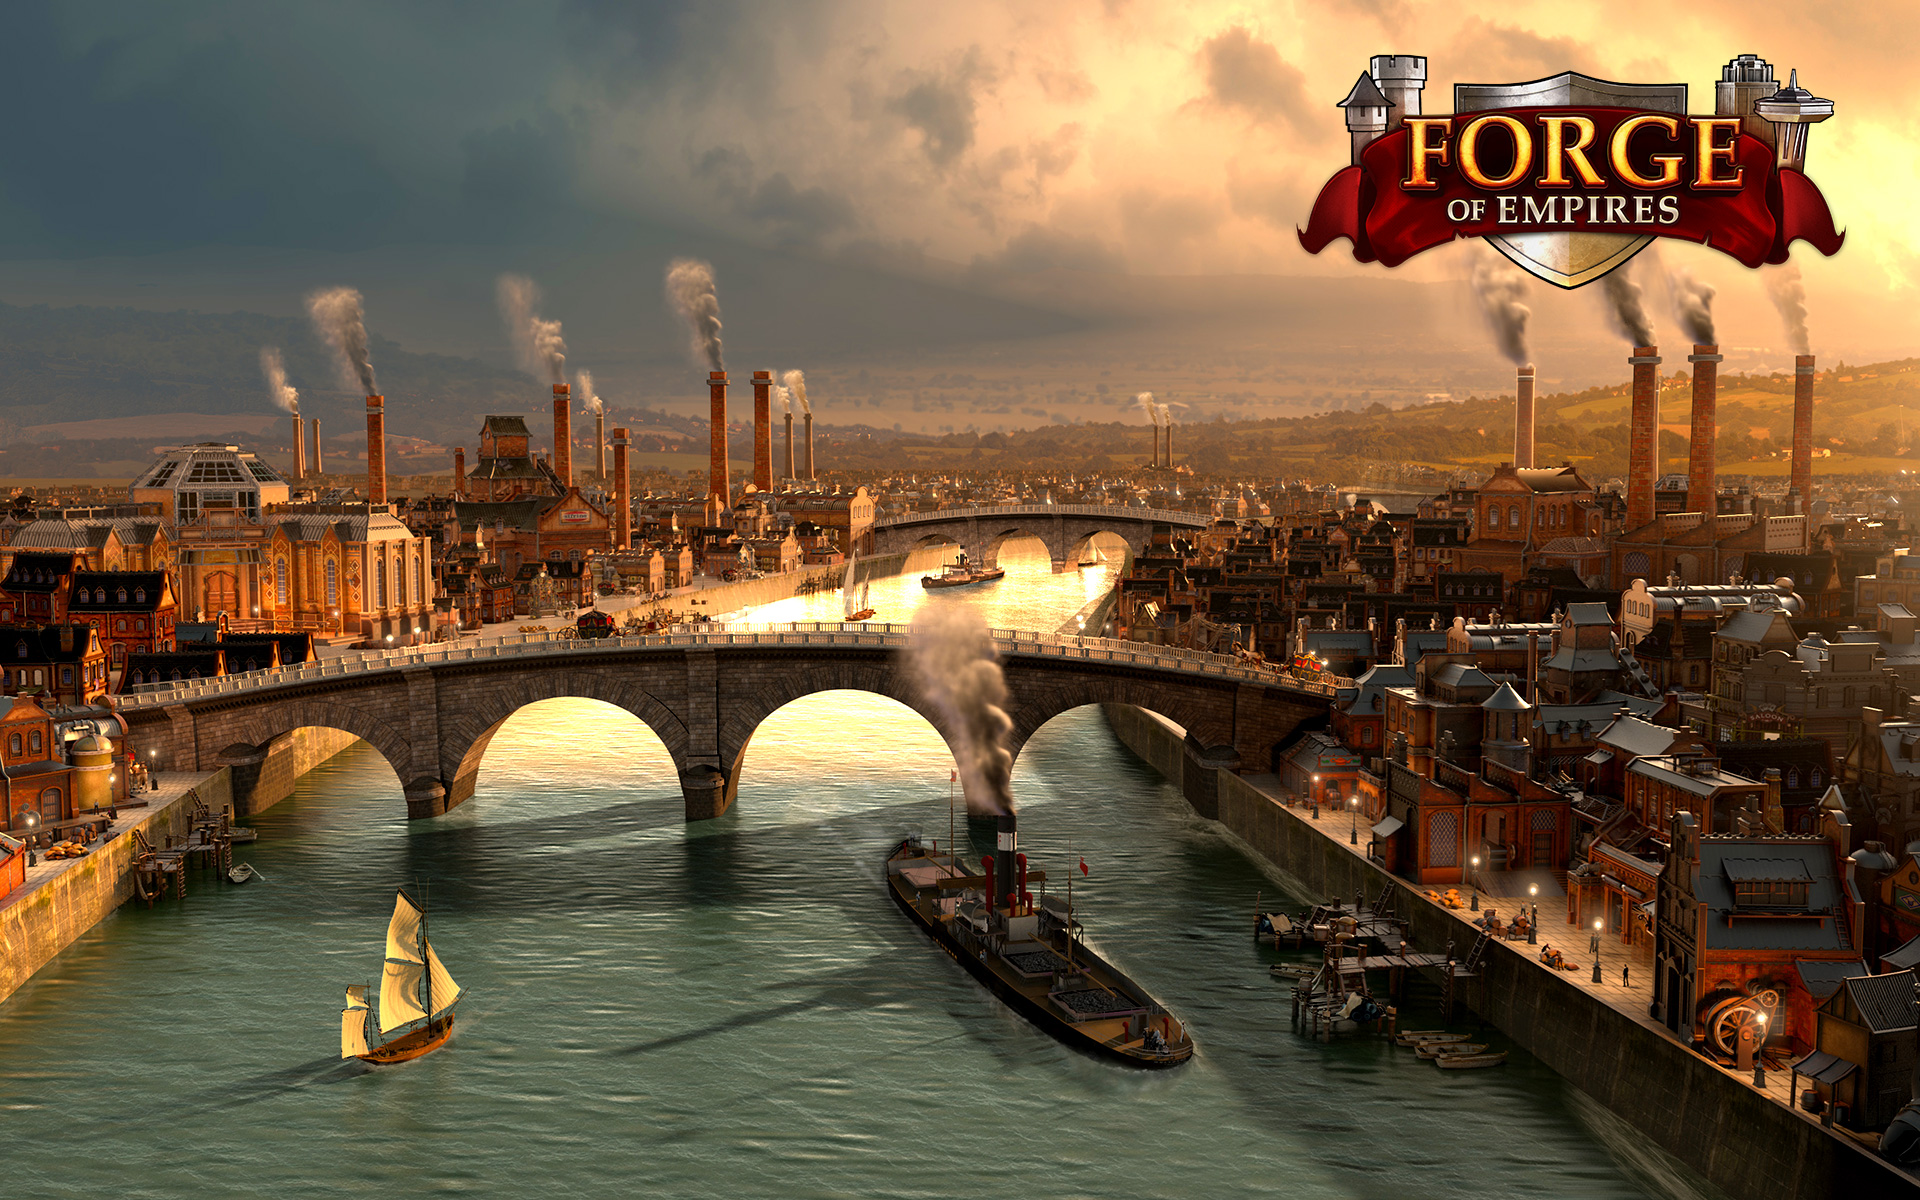 General 1920x1200 ship water bridge Forge of Empires river video games cityscape city building clouds factories chimneys video game art smoke Online games harbor